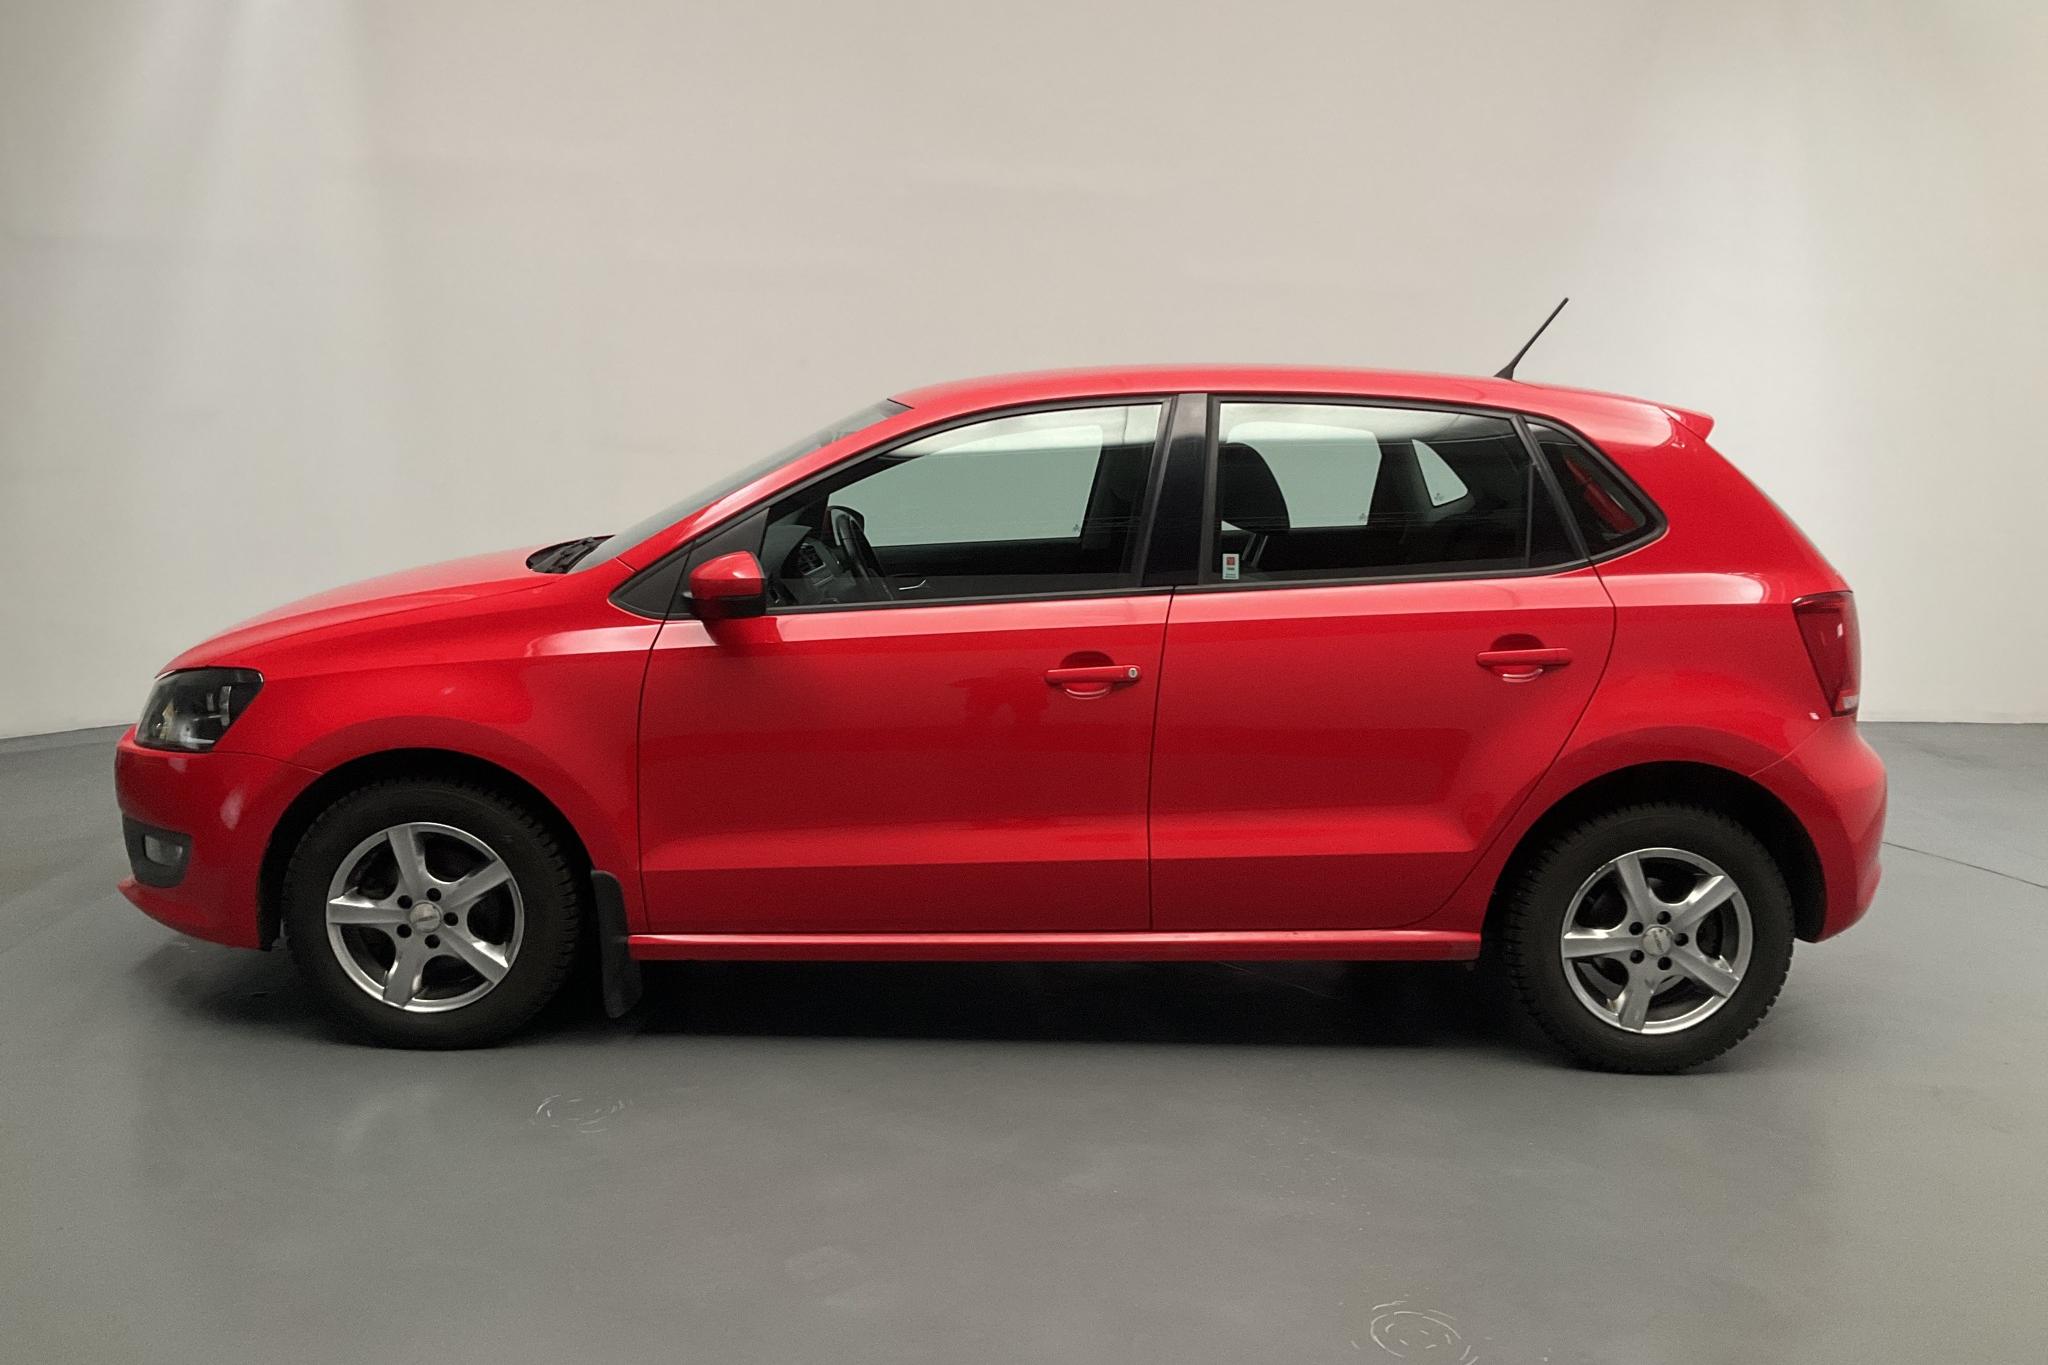 VW Polo 1.4 5dr (85hk) - 82 190 km - Automatic - red - 2010